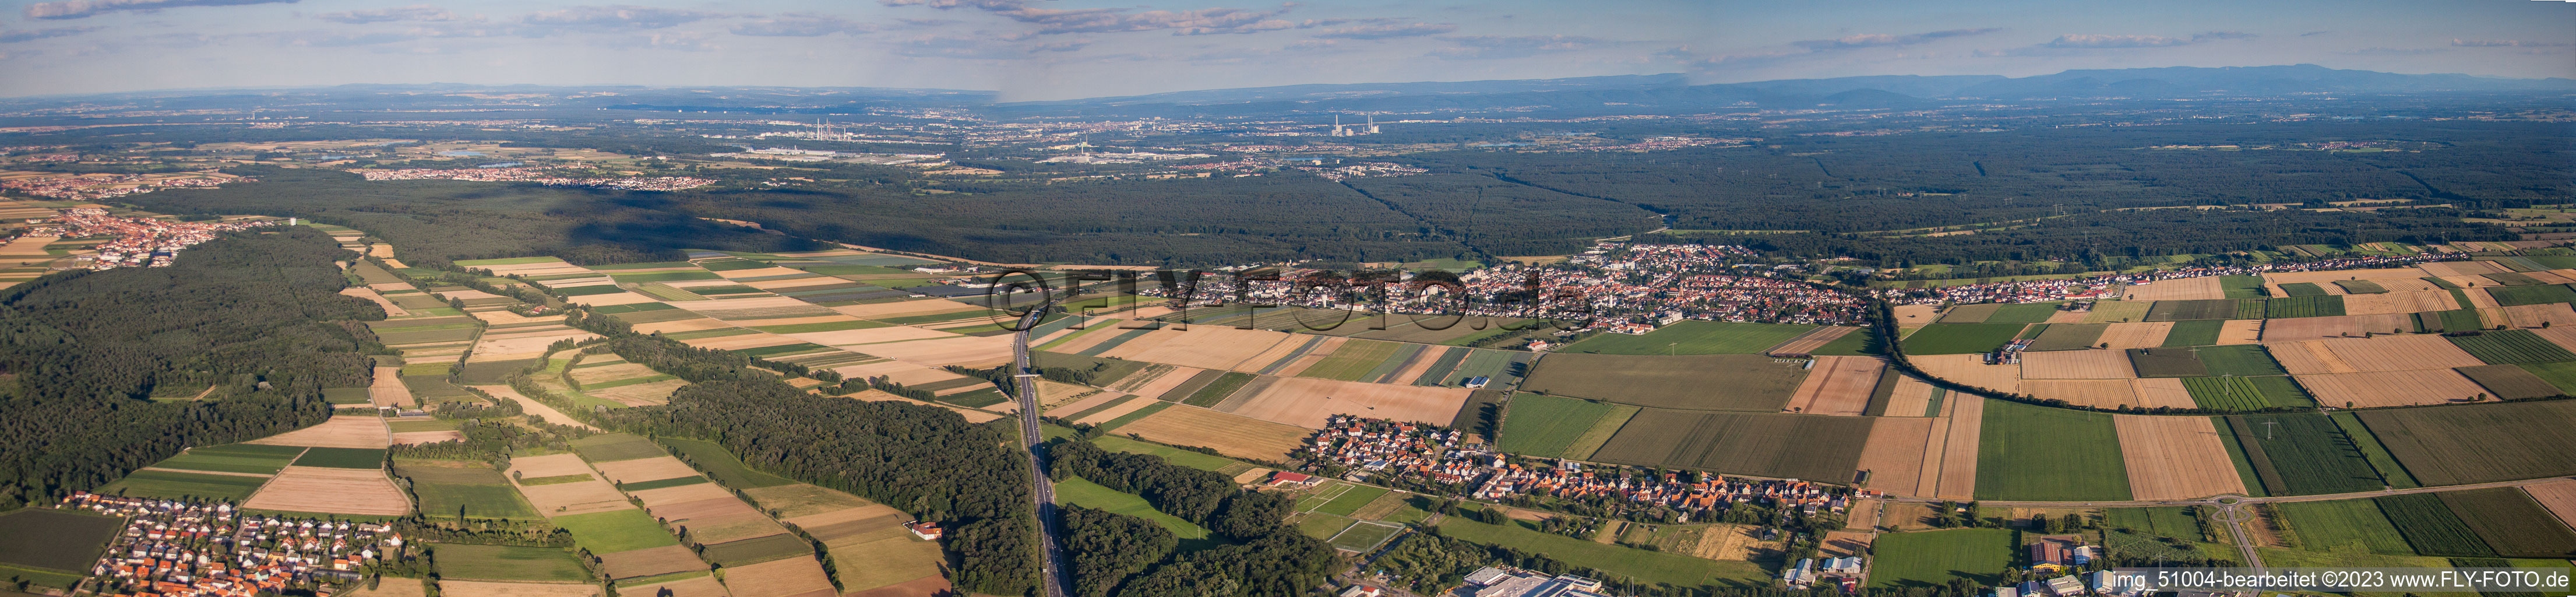 Panorama in Kandel in the state Rhineland-Palatinate, Germany from above